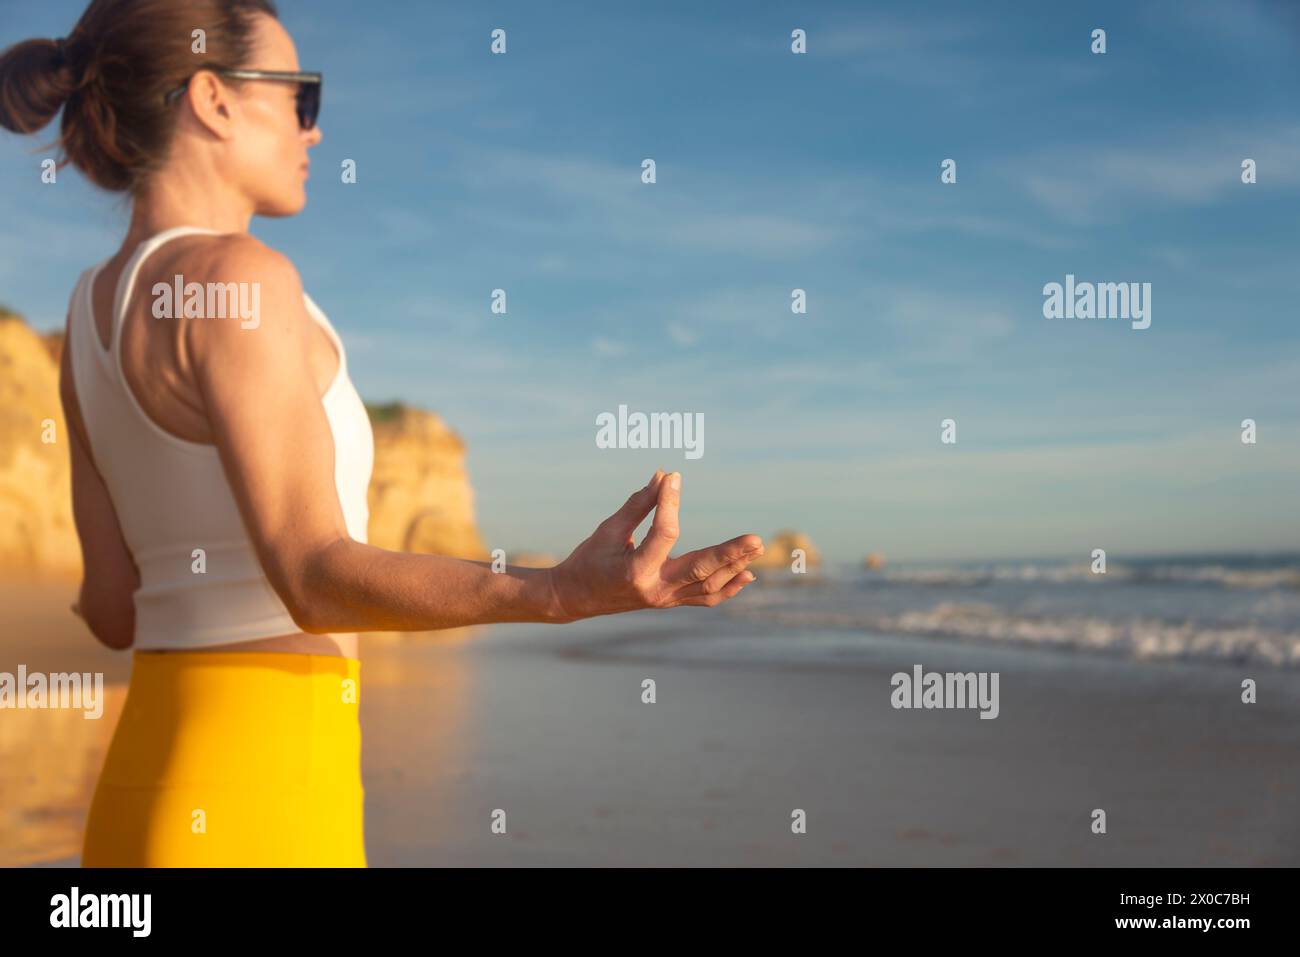 Woman finding inner peace and meditating on a beach. Stock Photo